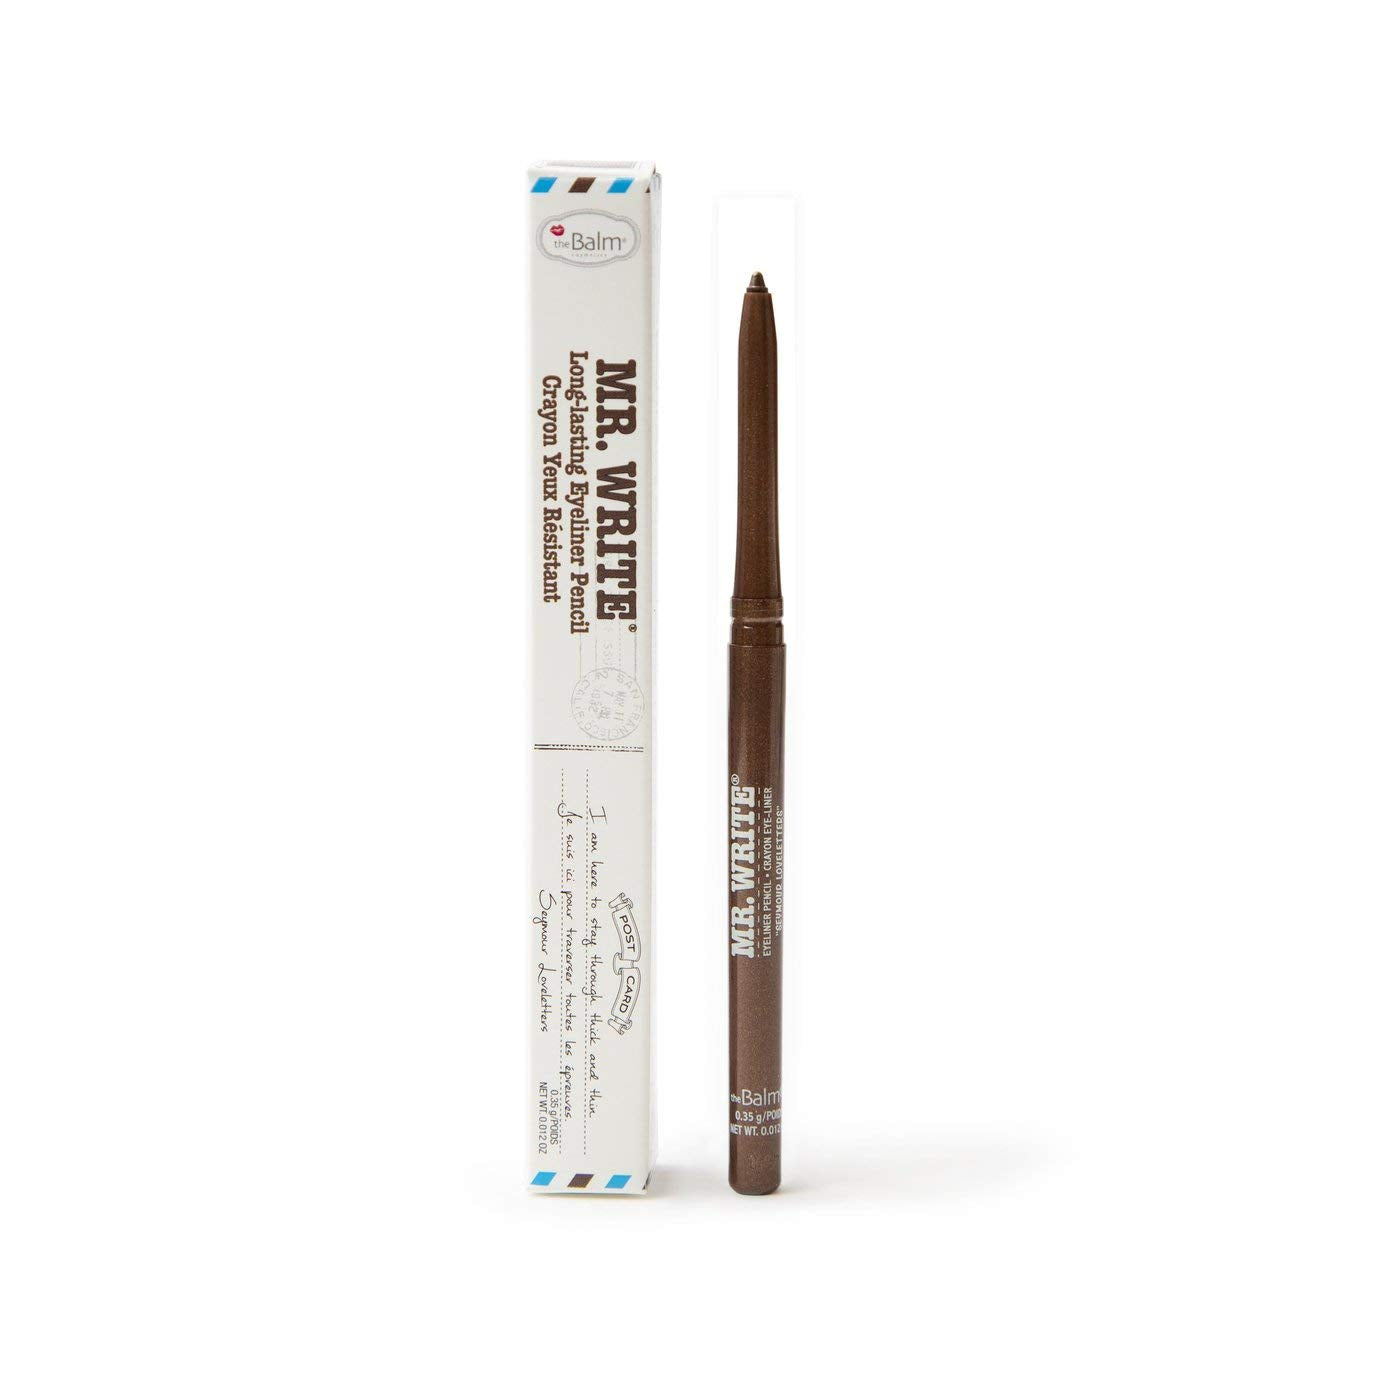 theBalm Mr. Write Seymour Loveletters Eyeliner Pencil, Long Lasting, Highly Pigmented, Satin Finish- brown